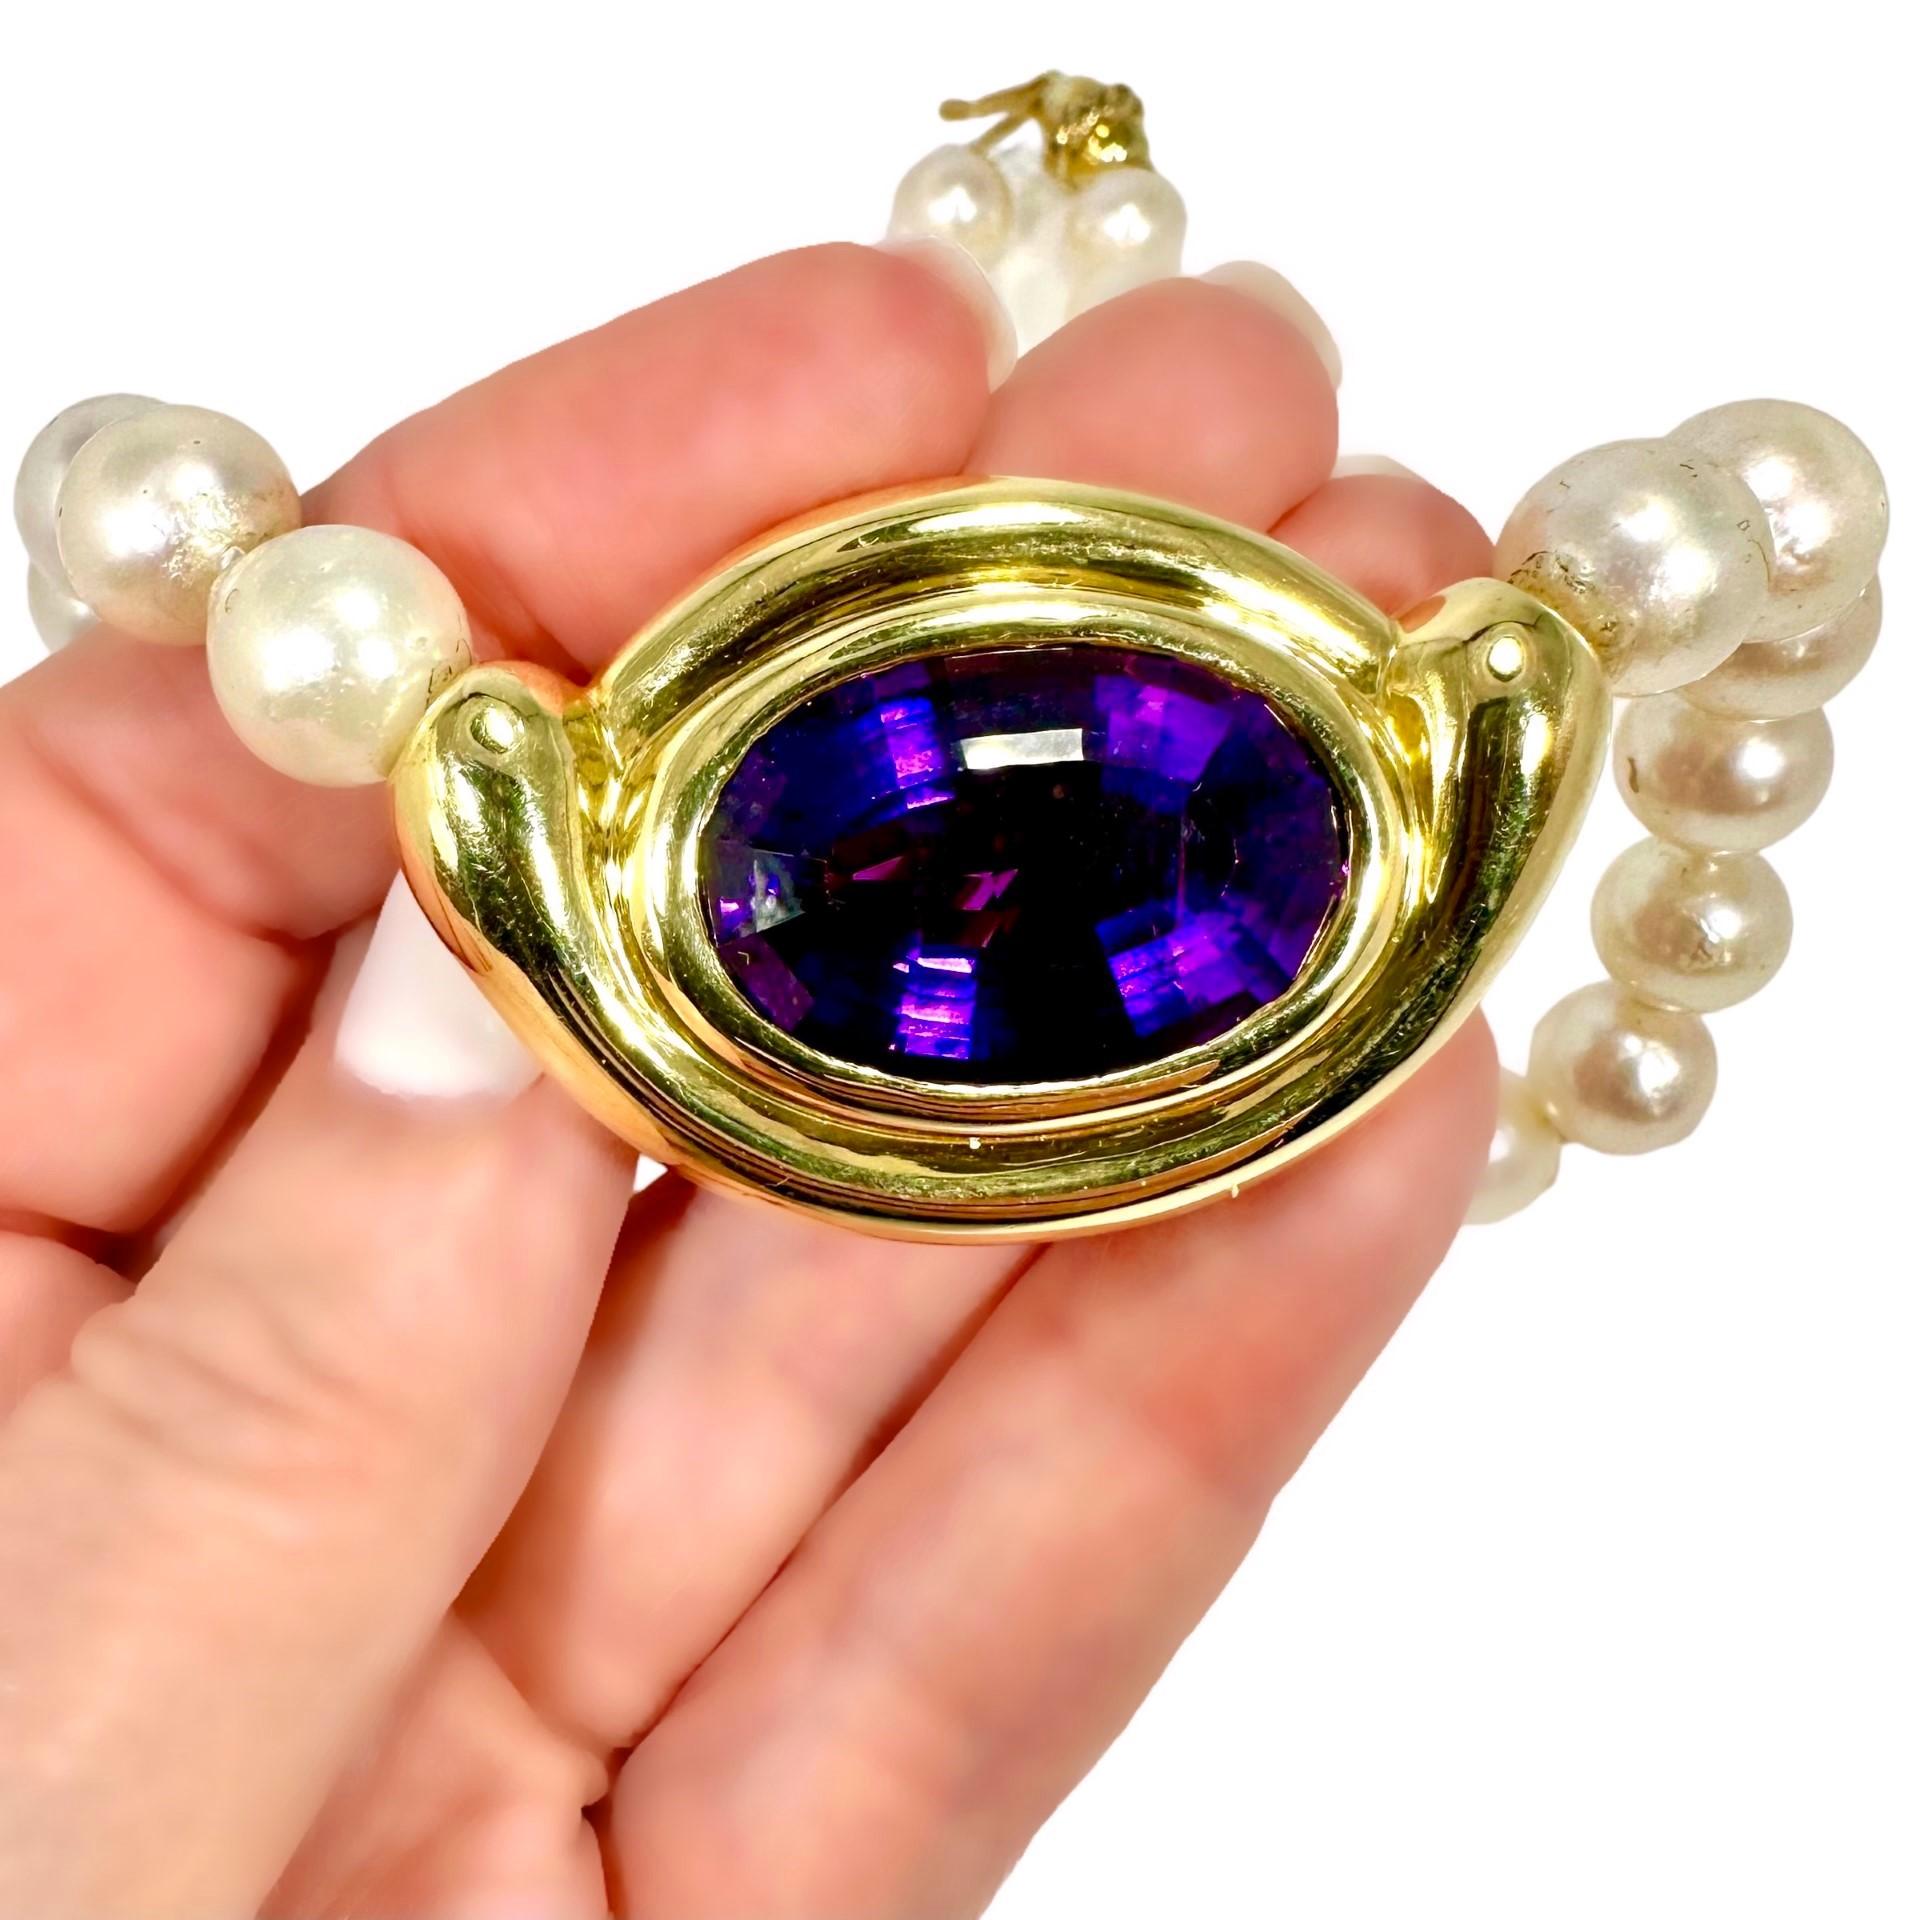 Women's Timeless Vintage 18k Gold Modernist Necklace with Amethyst and Akoya Pearls For Sale